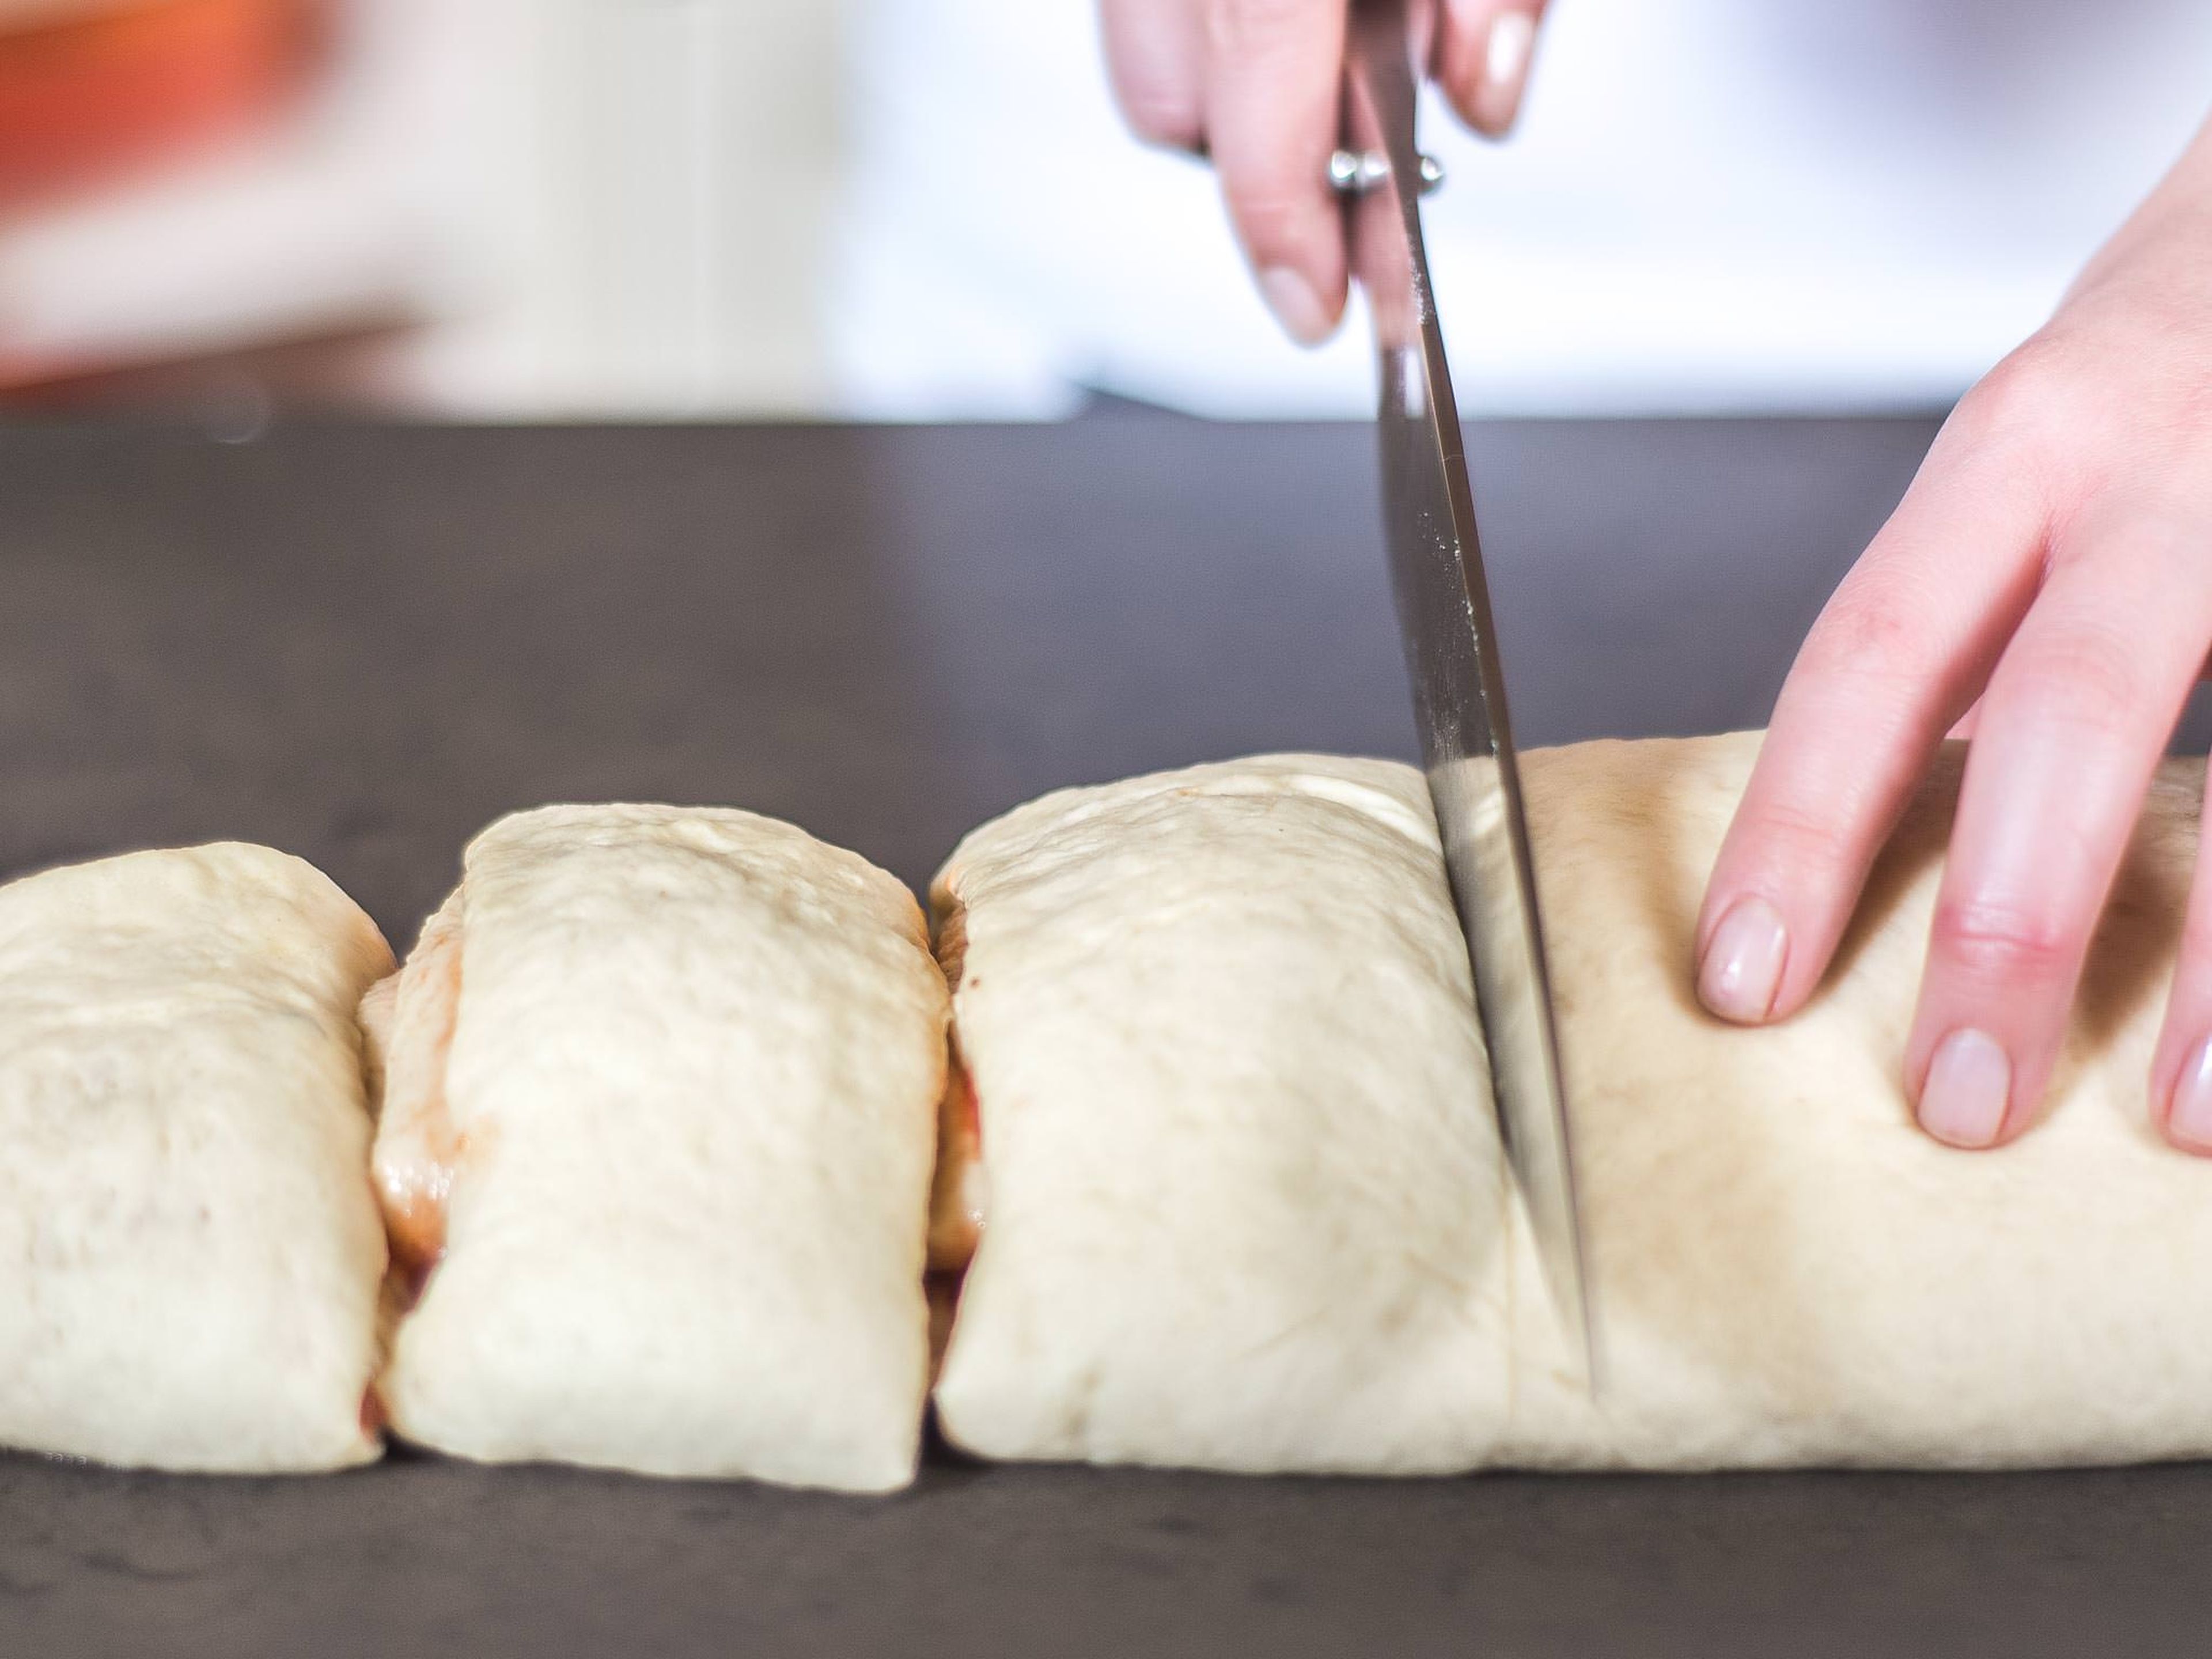 Cut the dough roll with a sharp knife into pieces, approx. 5 cm wide.